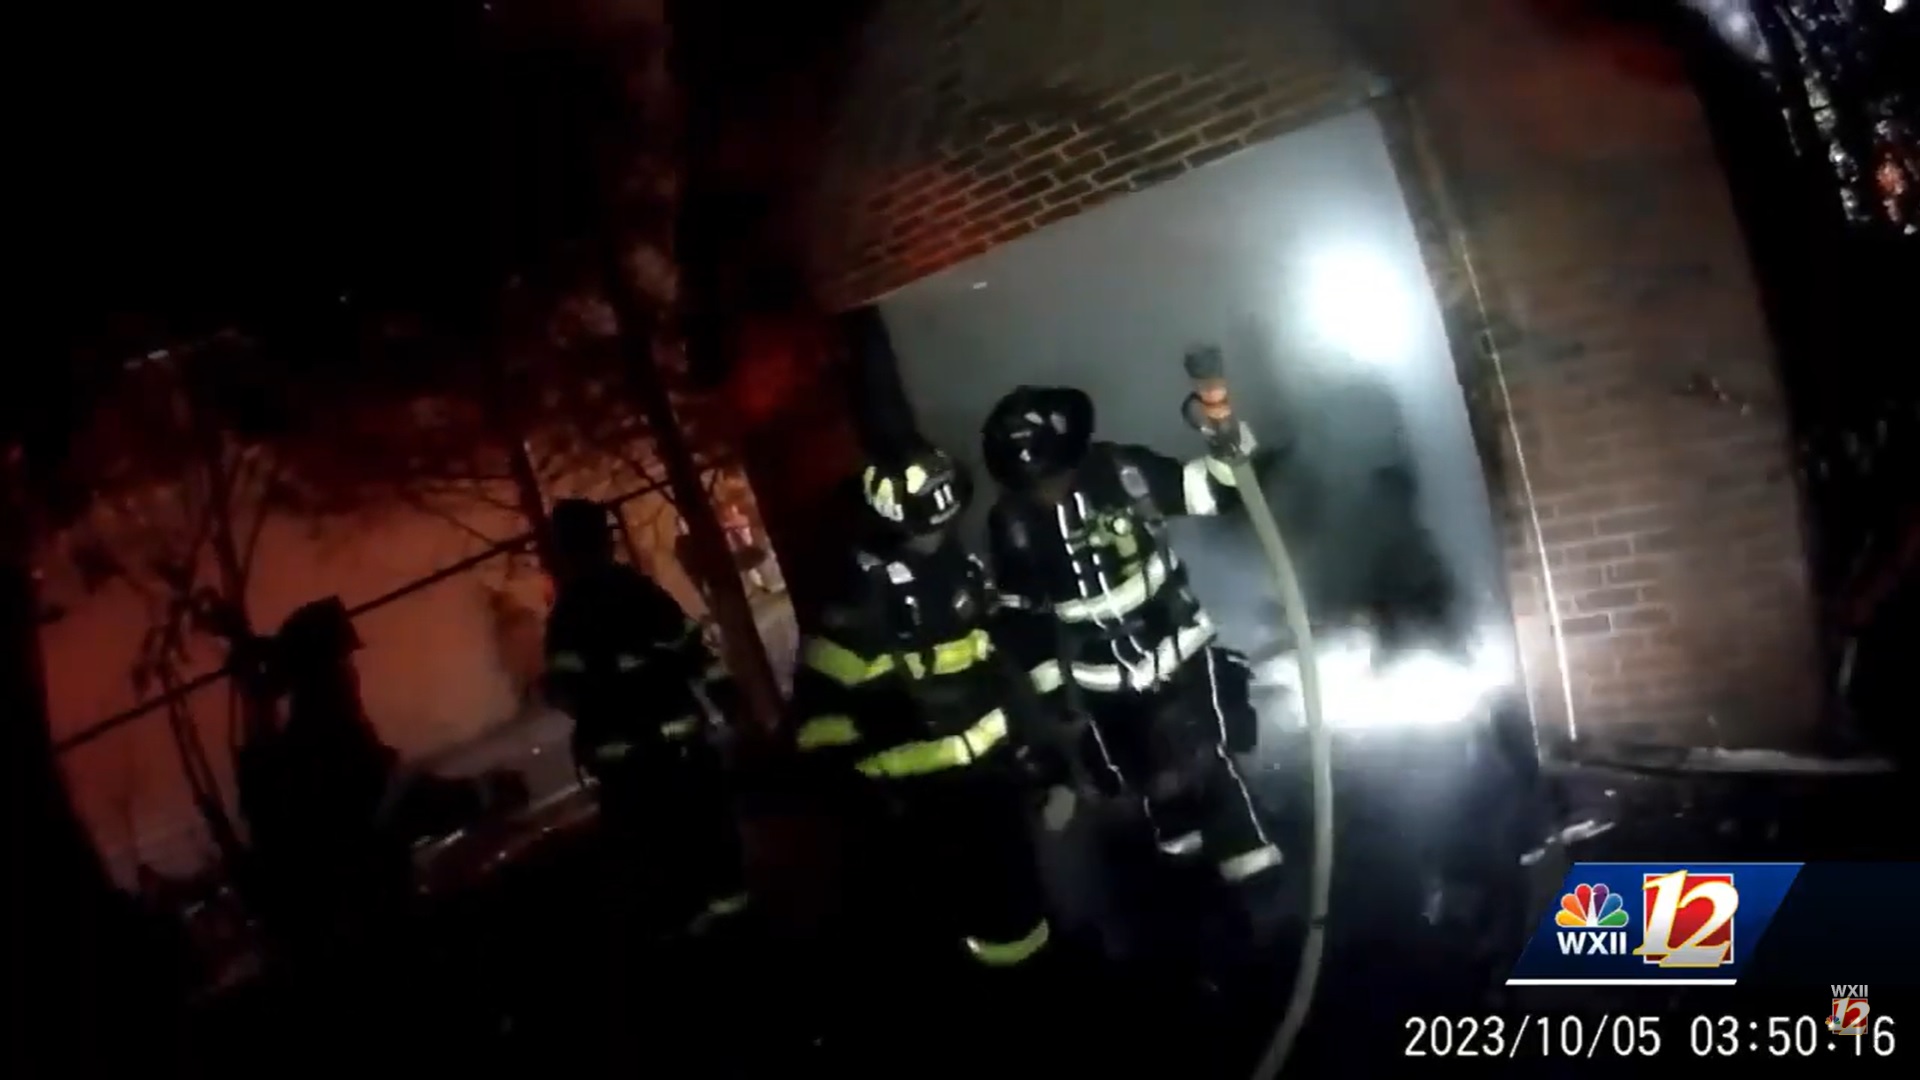 Caught on camera: Wall collapses on two North Carolina firefighters